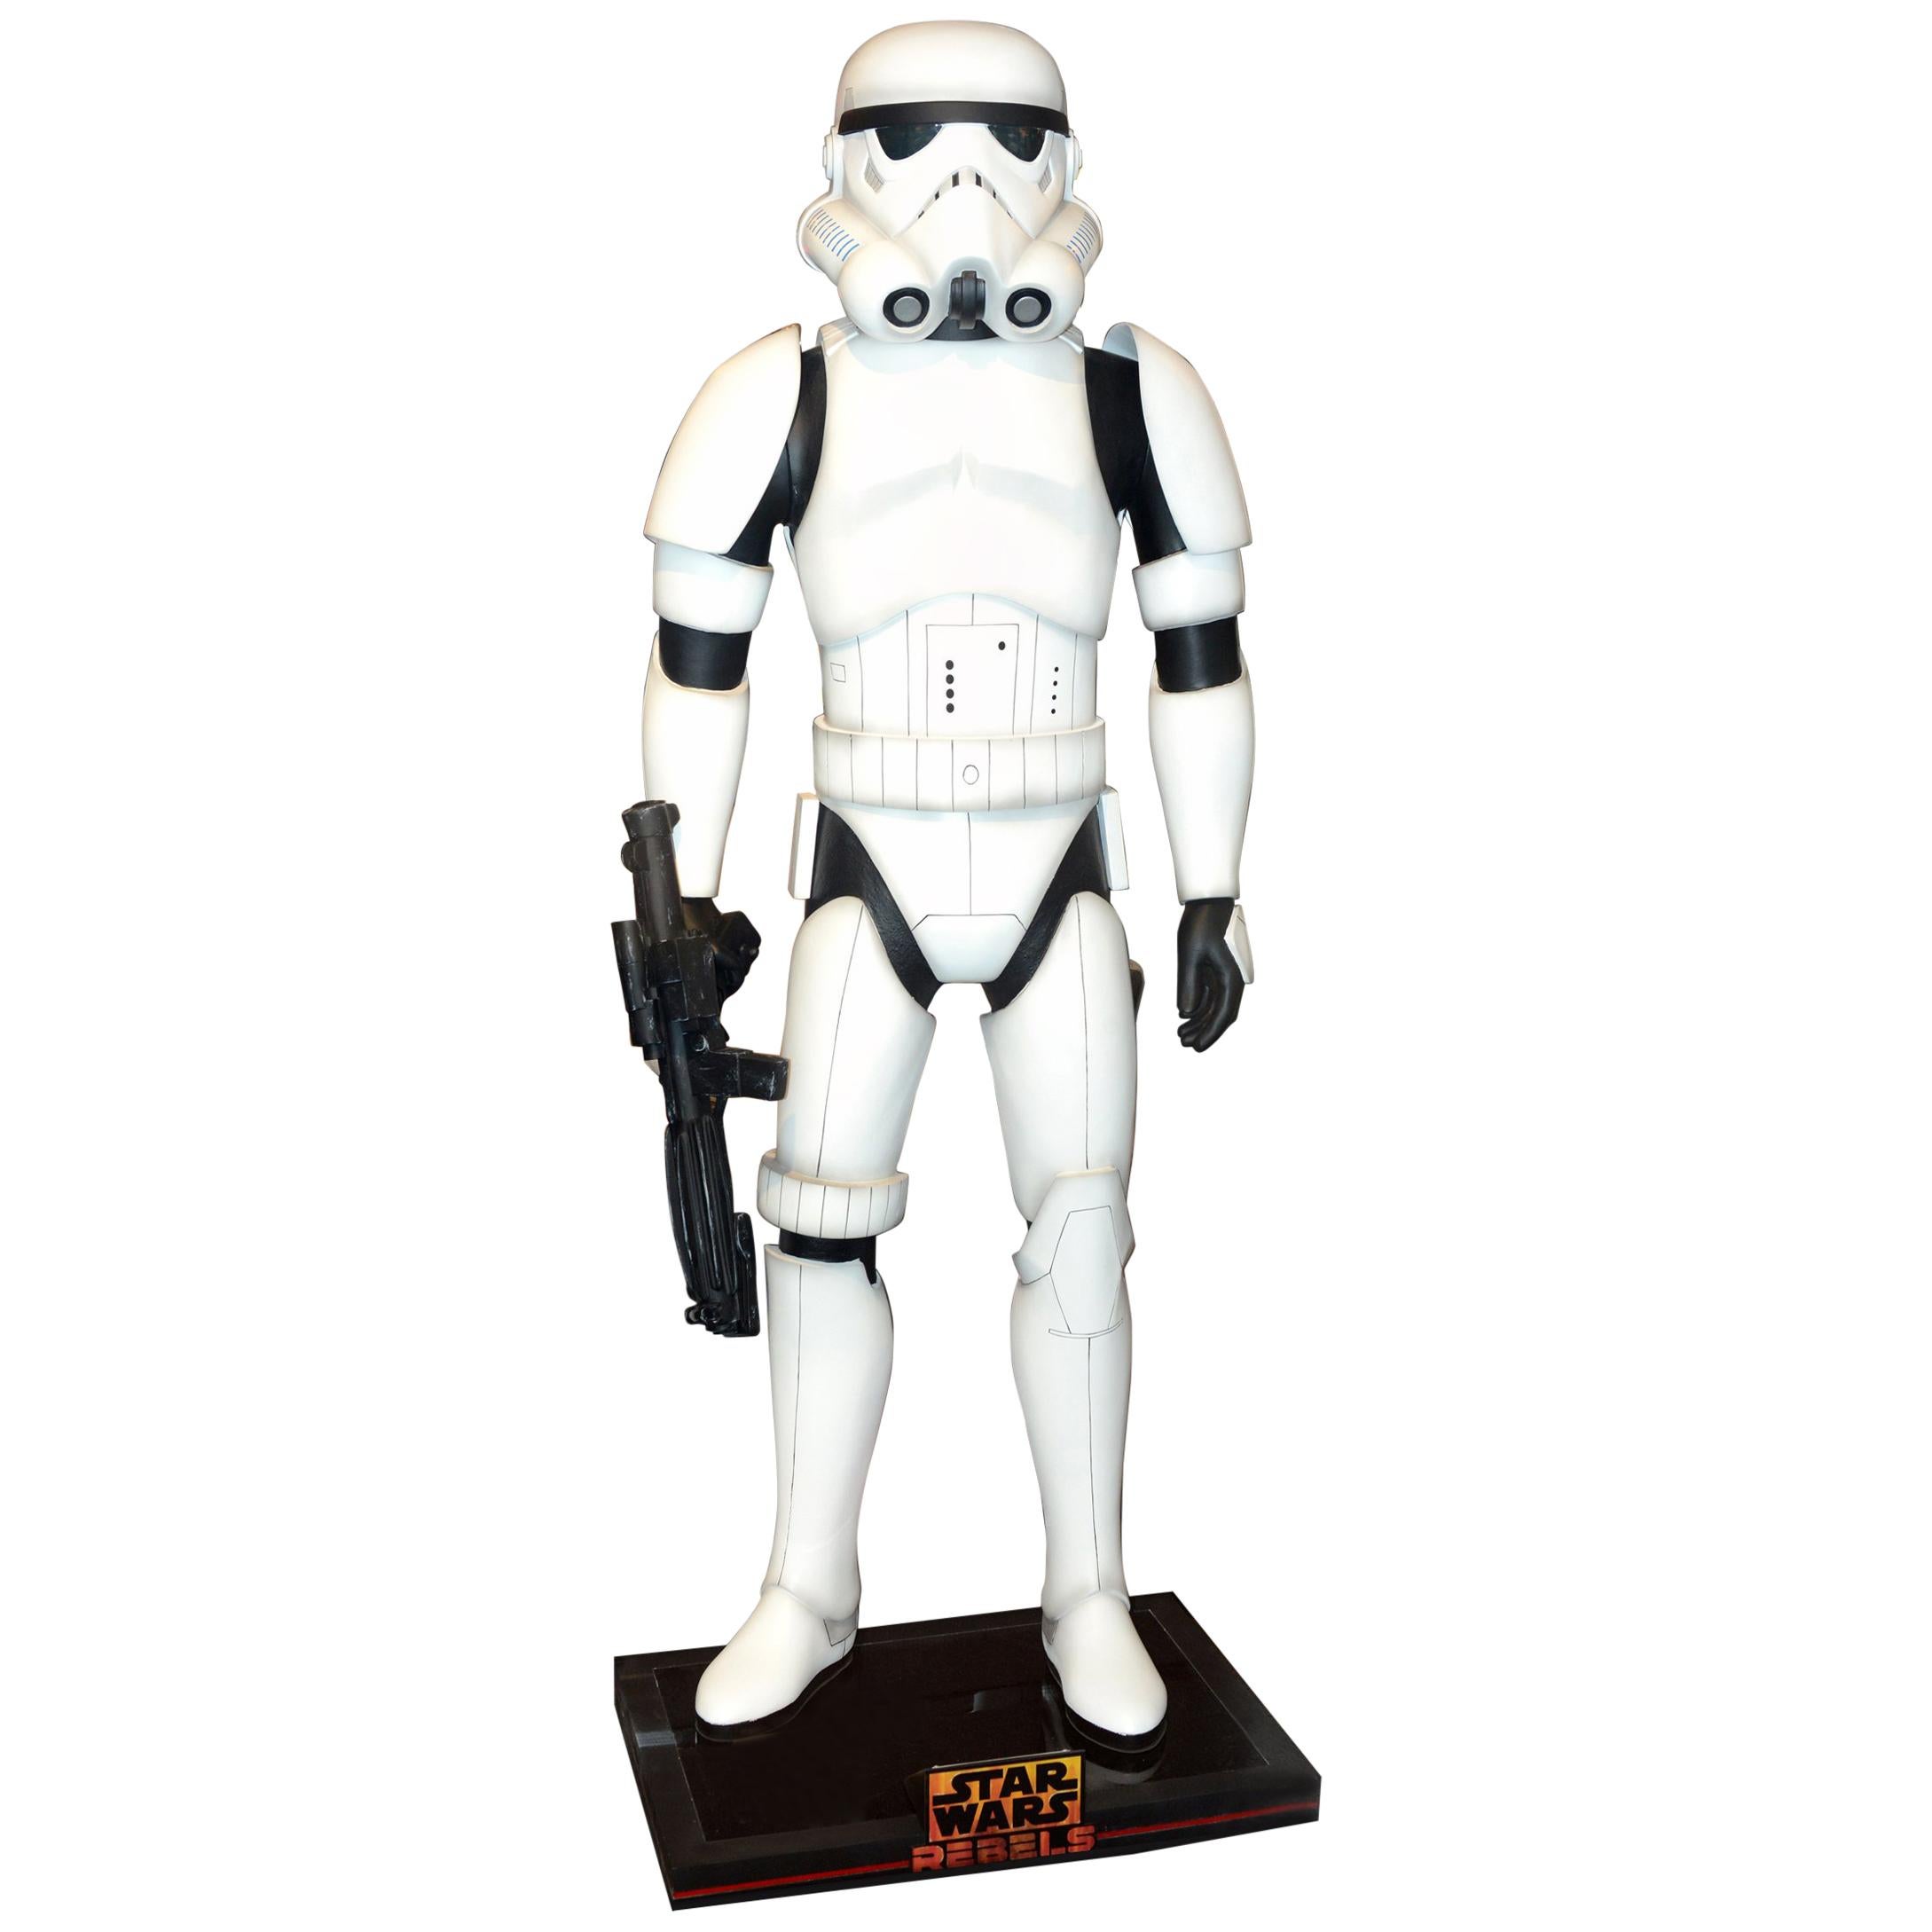 Stormtrooper Straight Arm Life-Size Star Wars Licensed Figure Limited Edition For Sale